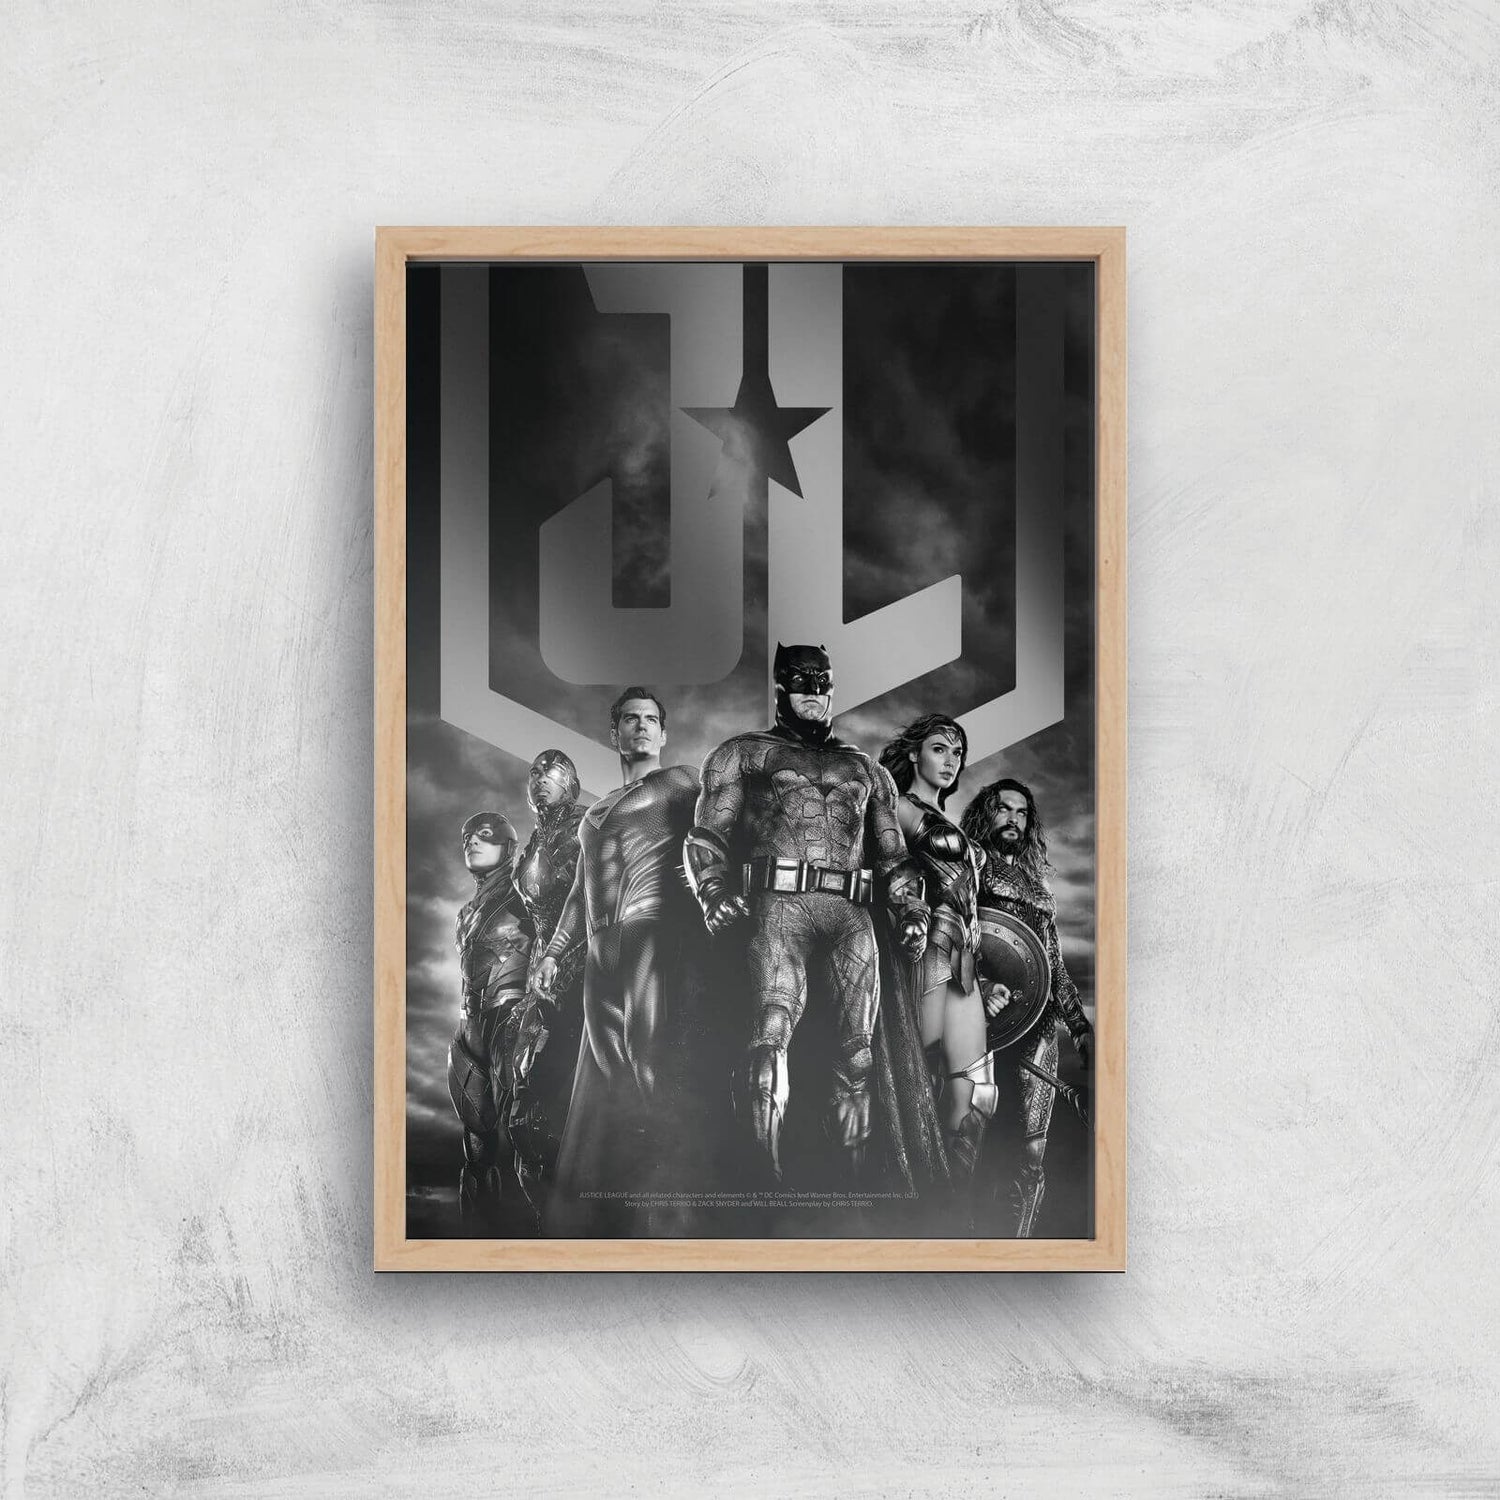 Justice League Team Poster Giclee Art Print - A3 - Wooden Frame